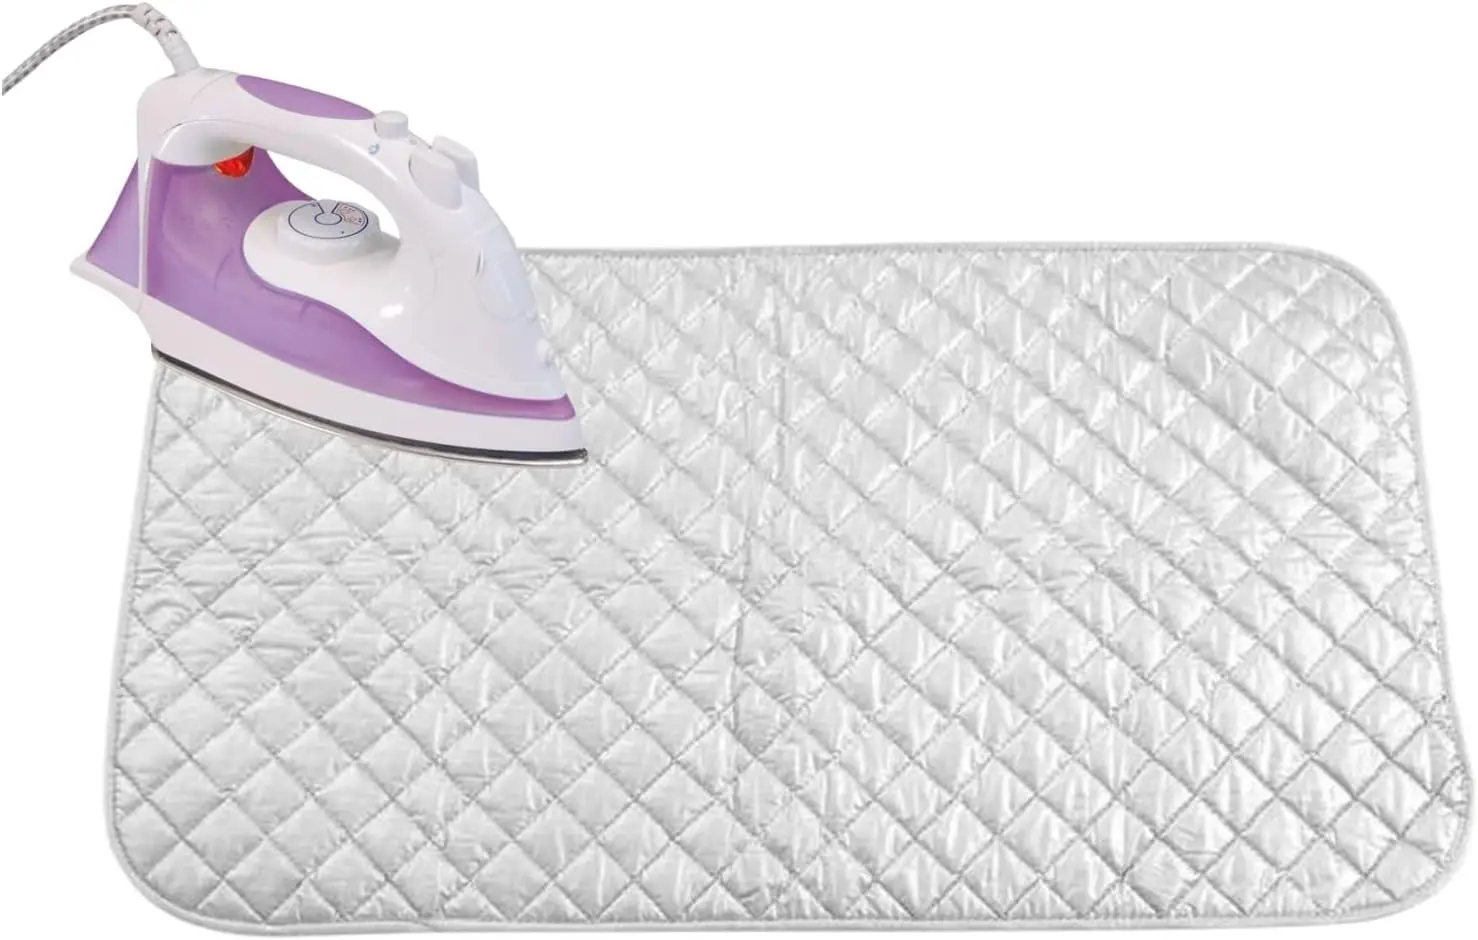 Ironing Mat, Ironing Board Cover and Pad, Quilted Ironing Mat